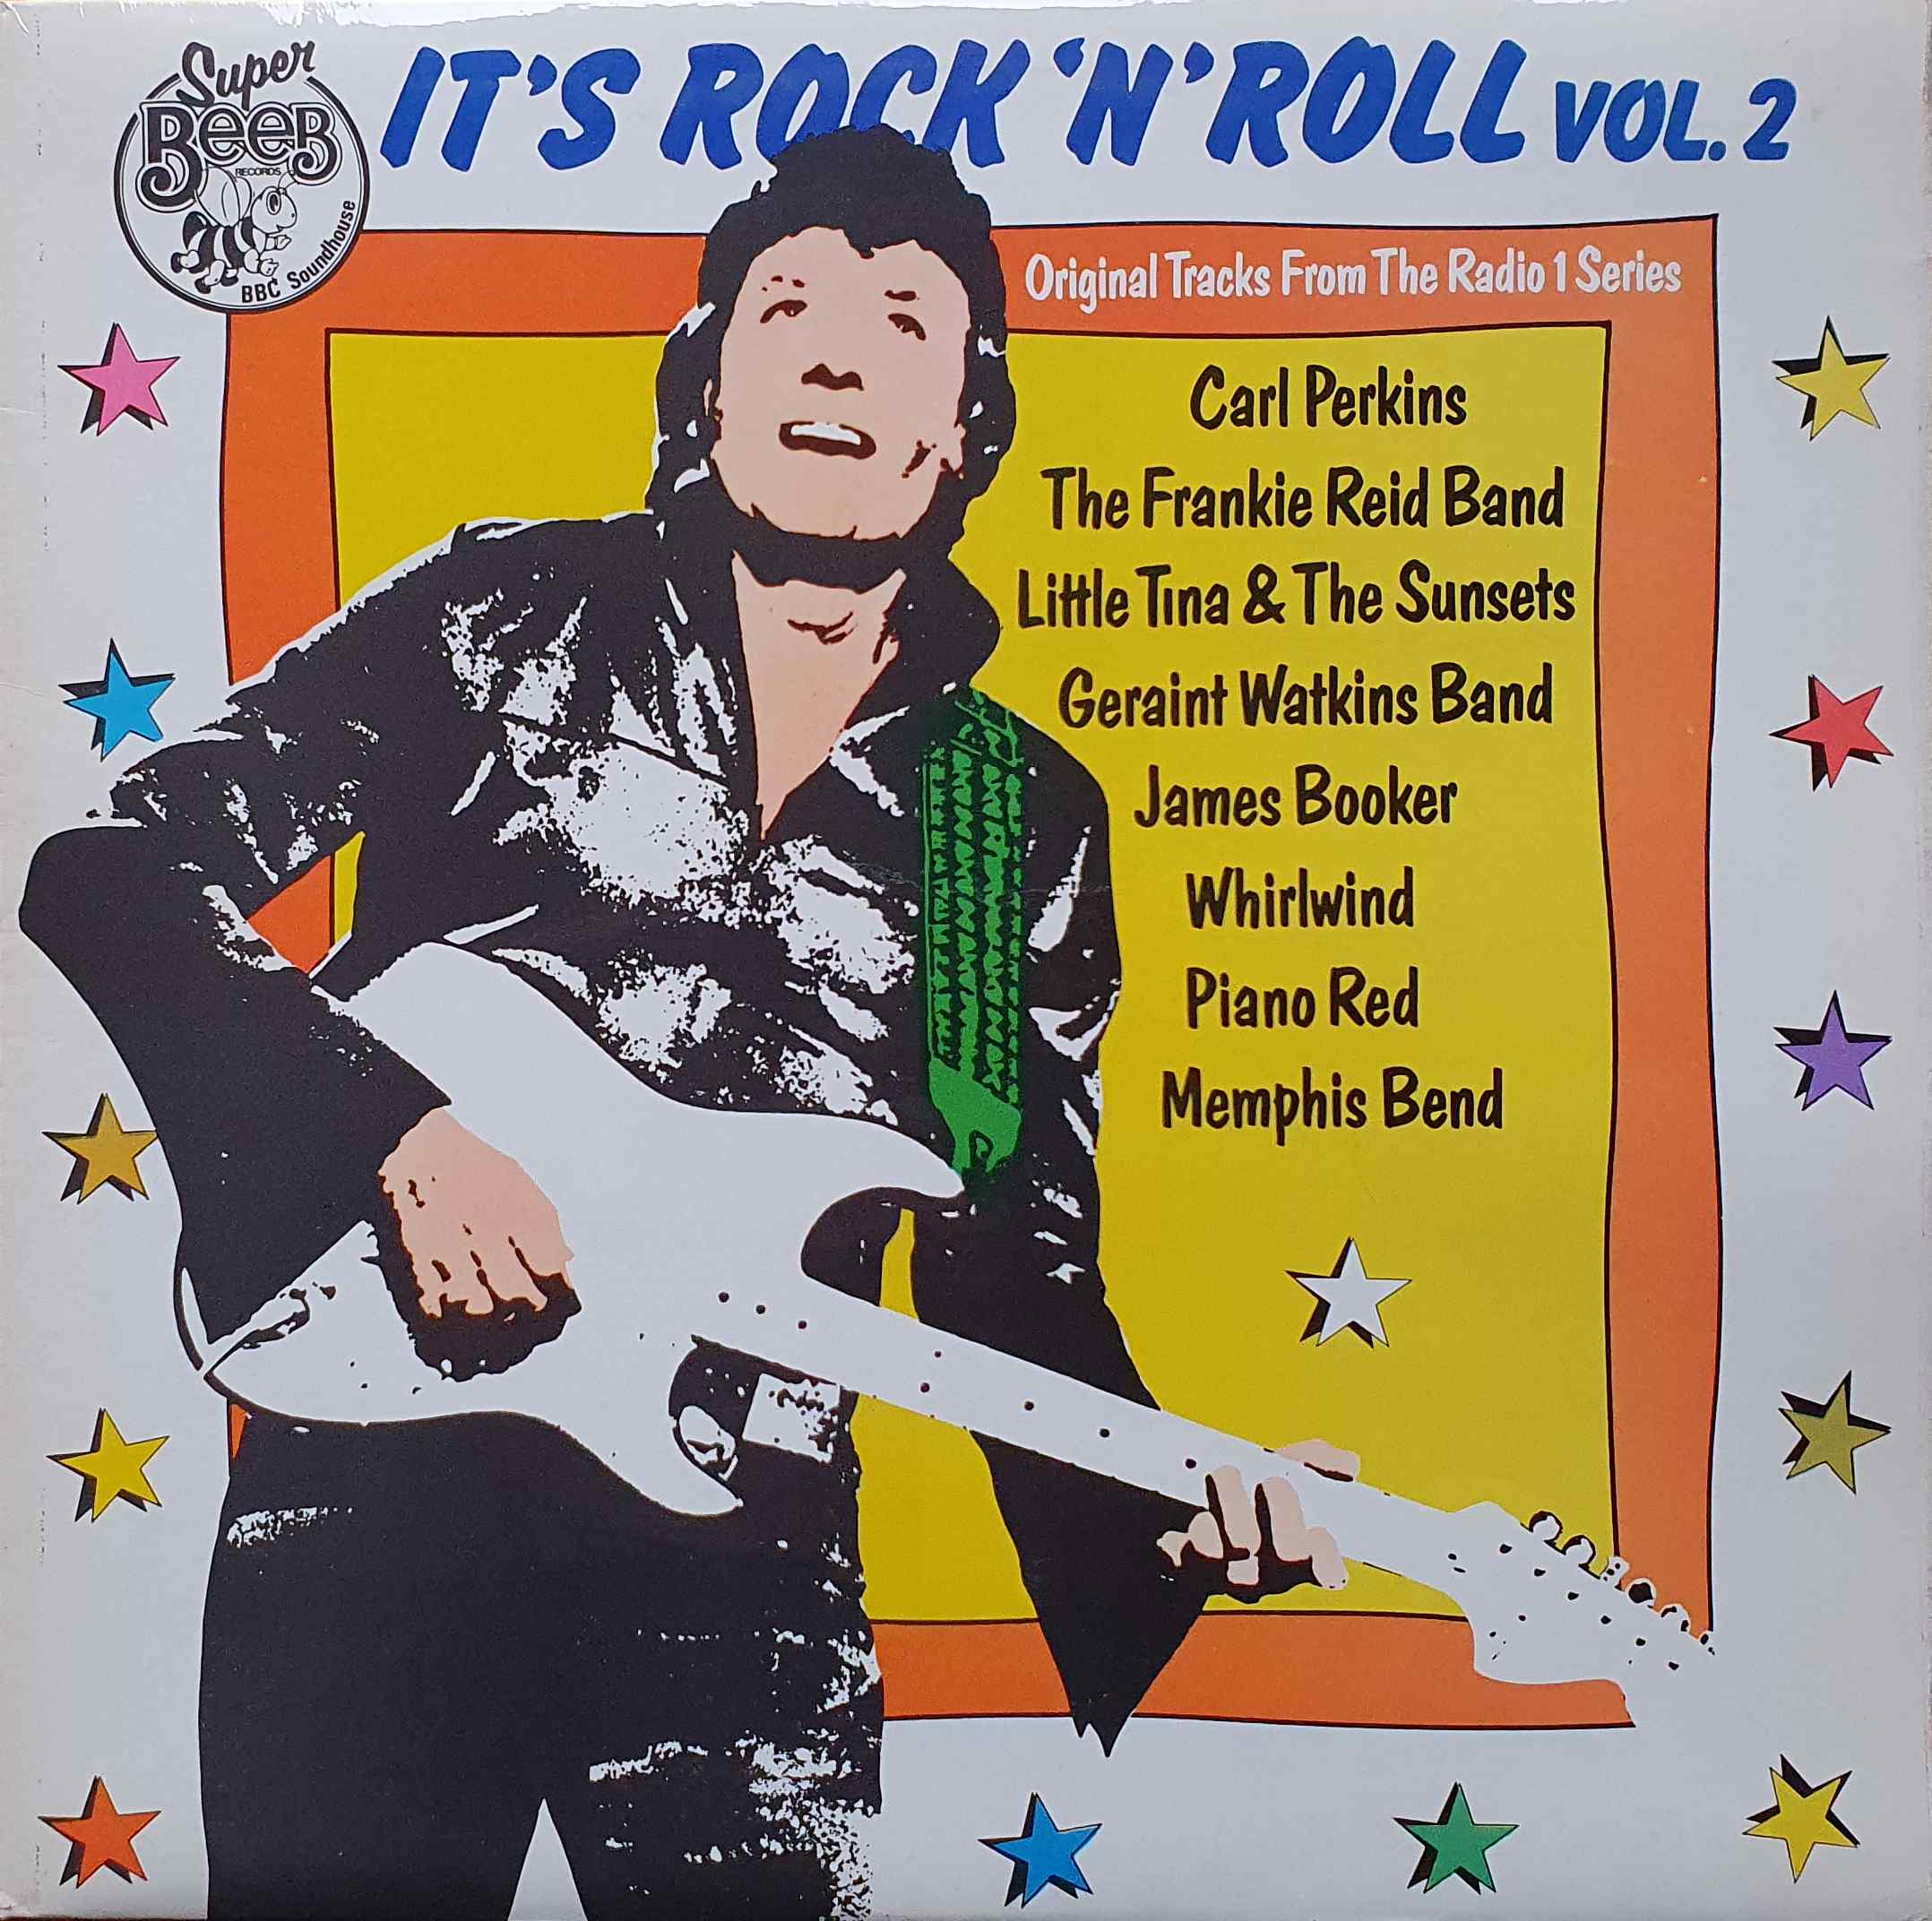 Picture of BEMP 004 Its rock n roll - Volume 2 by artist Various from the BBC albums - Records and Tapes library